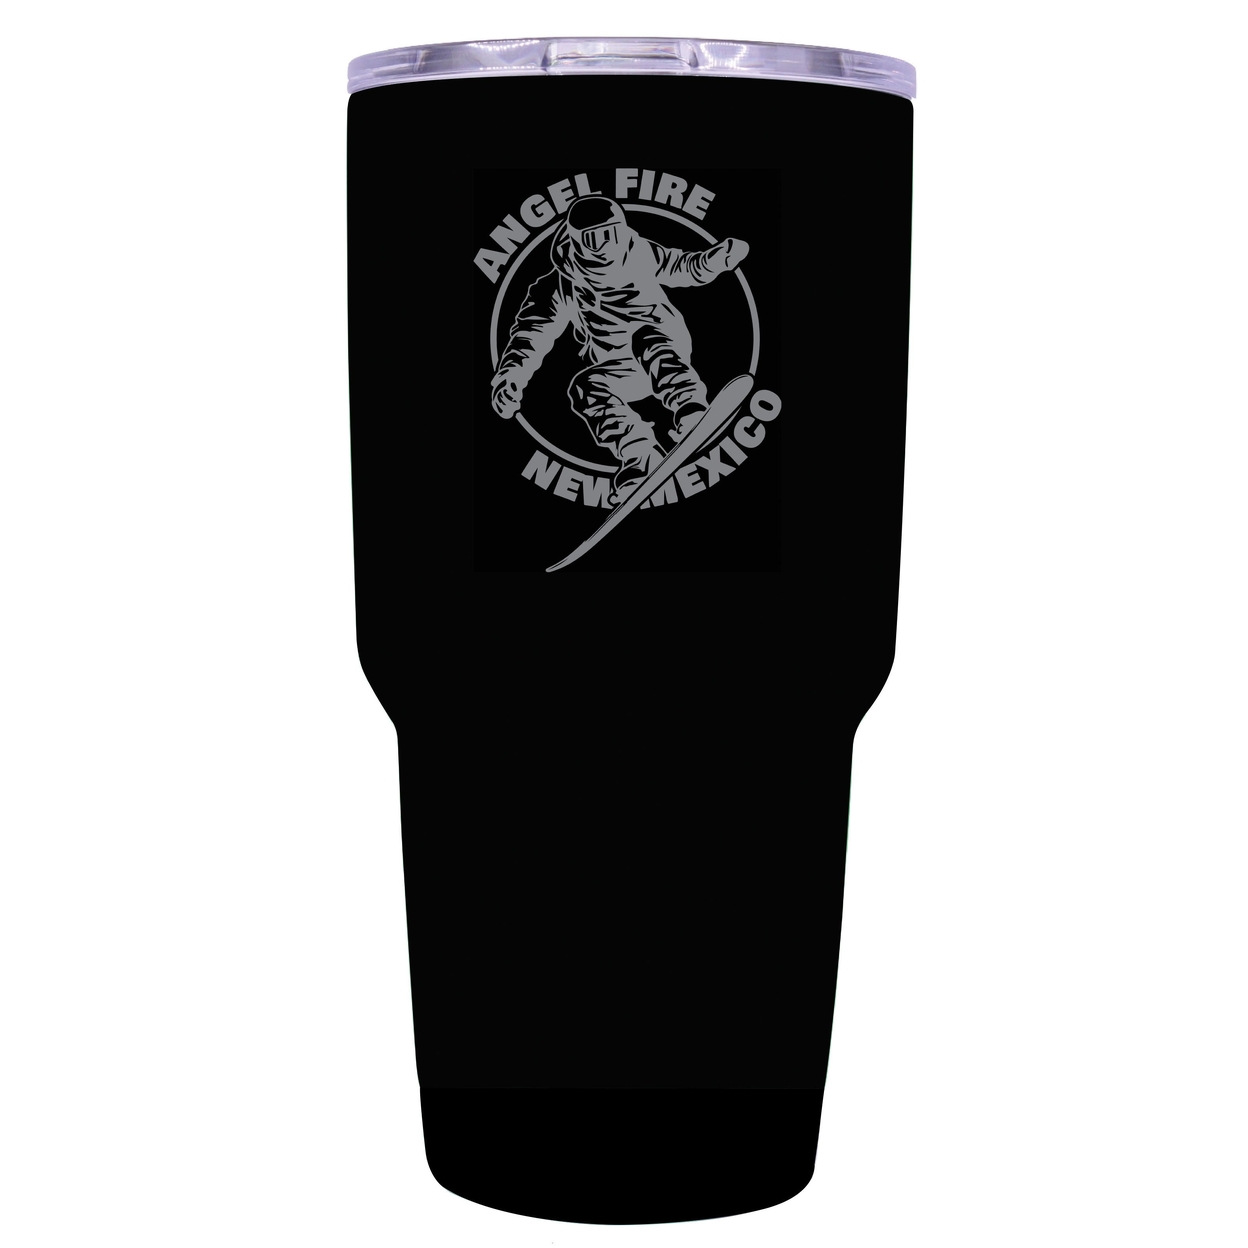 Angel Fire New Mexico Souvenir 24 Oz Engraved Insulated Stainless Steel Tumbler - Black,,2-Pack